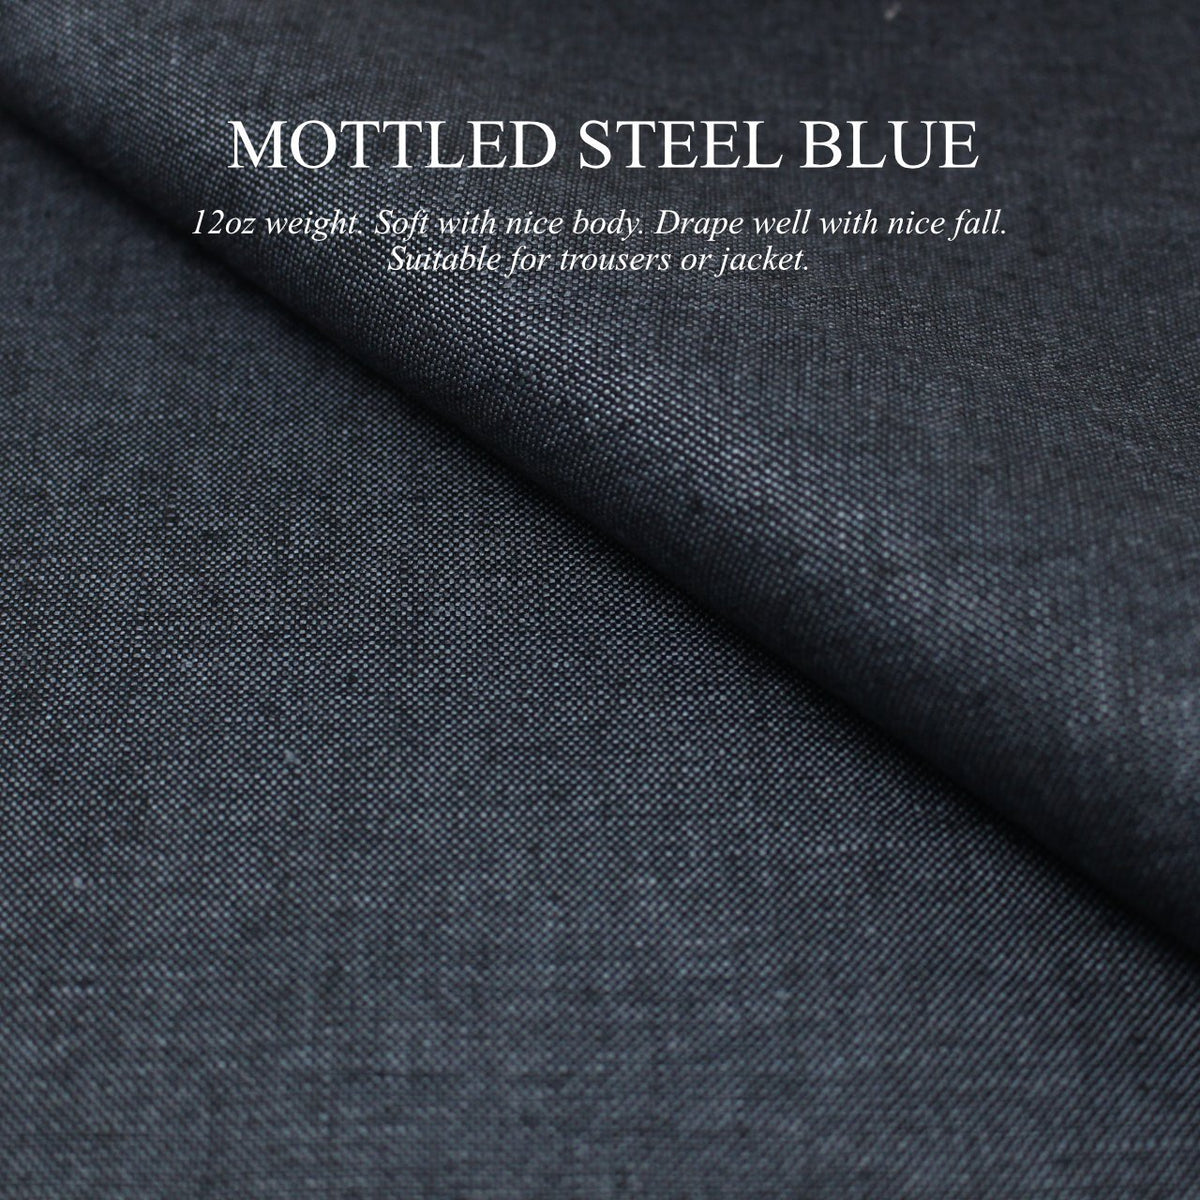 https://cdn.shopify.com/s/files/1/1299/4877/products/Mottled_Steel_blue_4d3f0a57-b6af-4d6b-9b2a-73c5e2d3b33c_1200x.jpg?v=1564305702